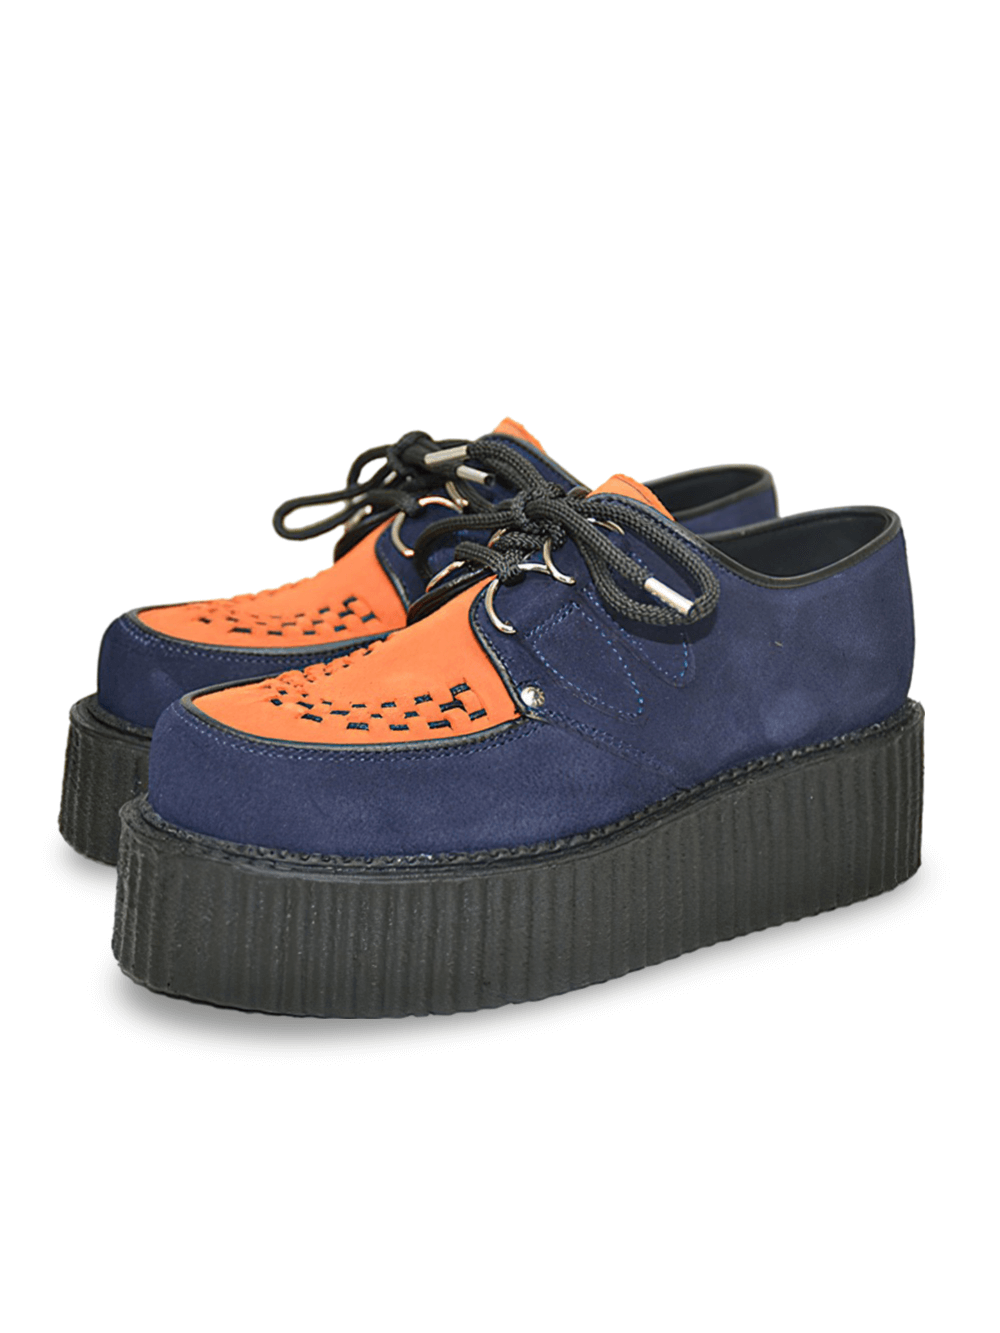 Navy and Orange Suede Creepers With Double Sole